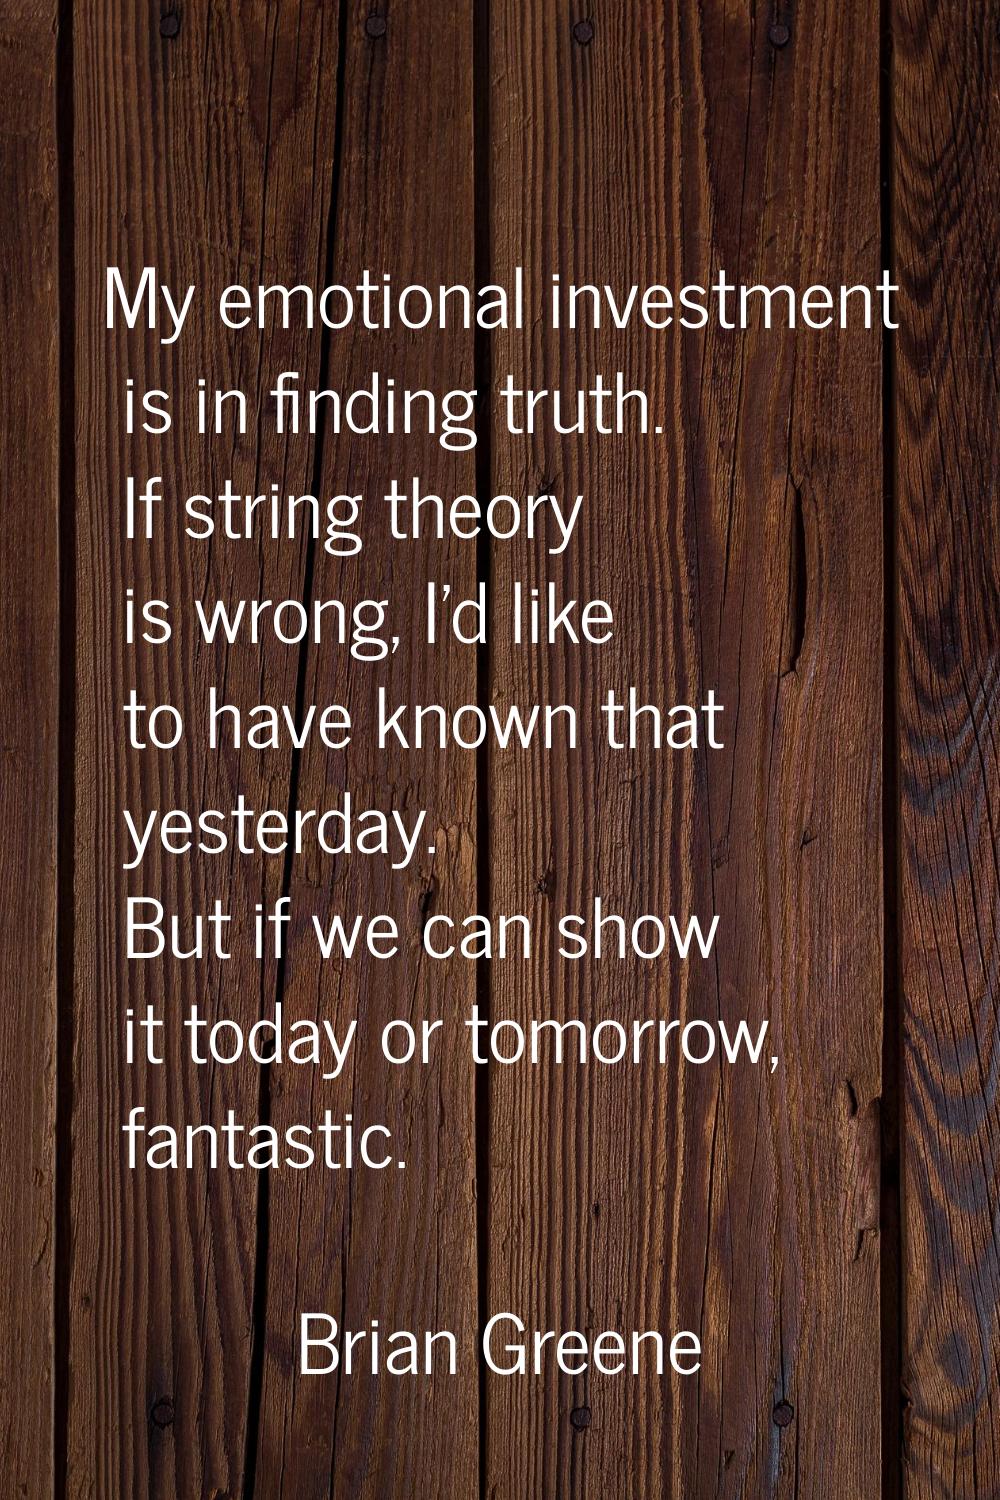 My emotional investment is in finding truth. If string theory is wrong, I'd like to have known that